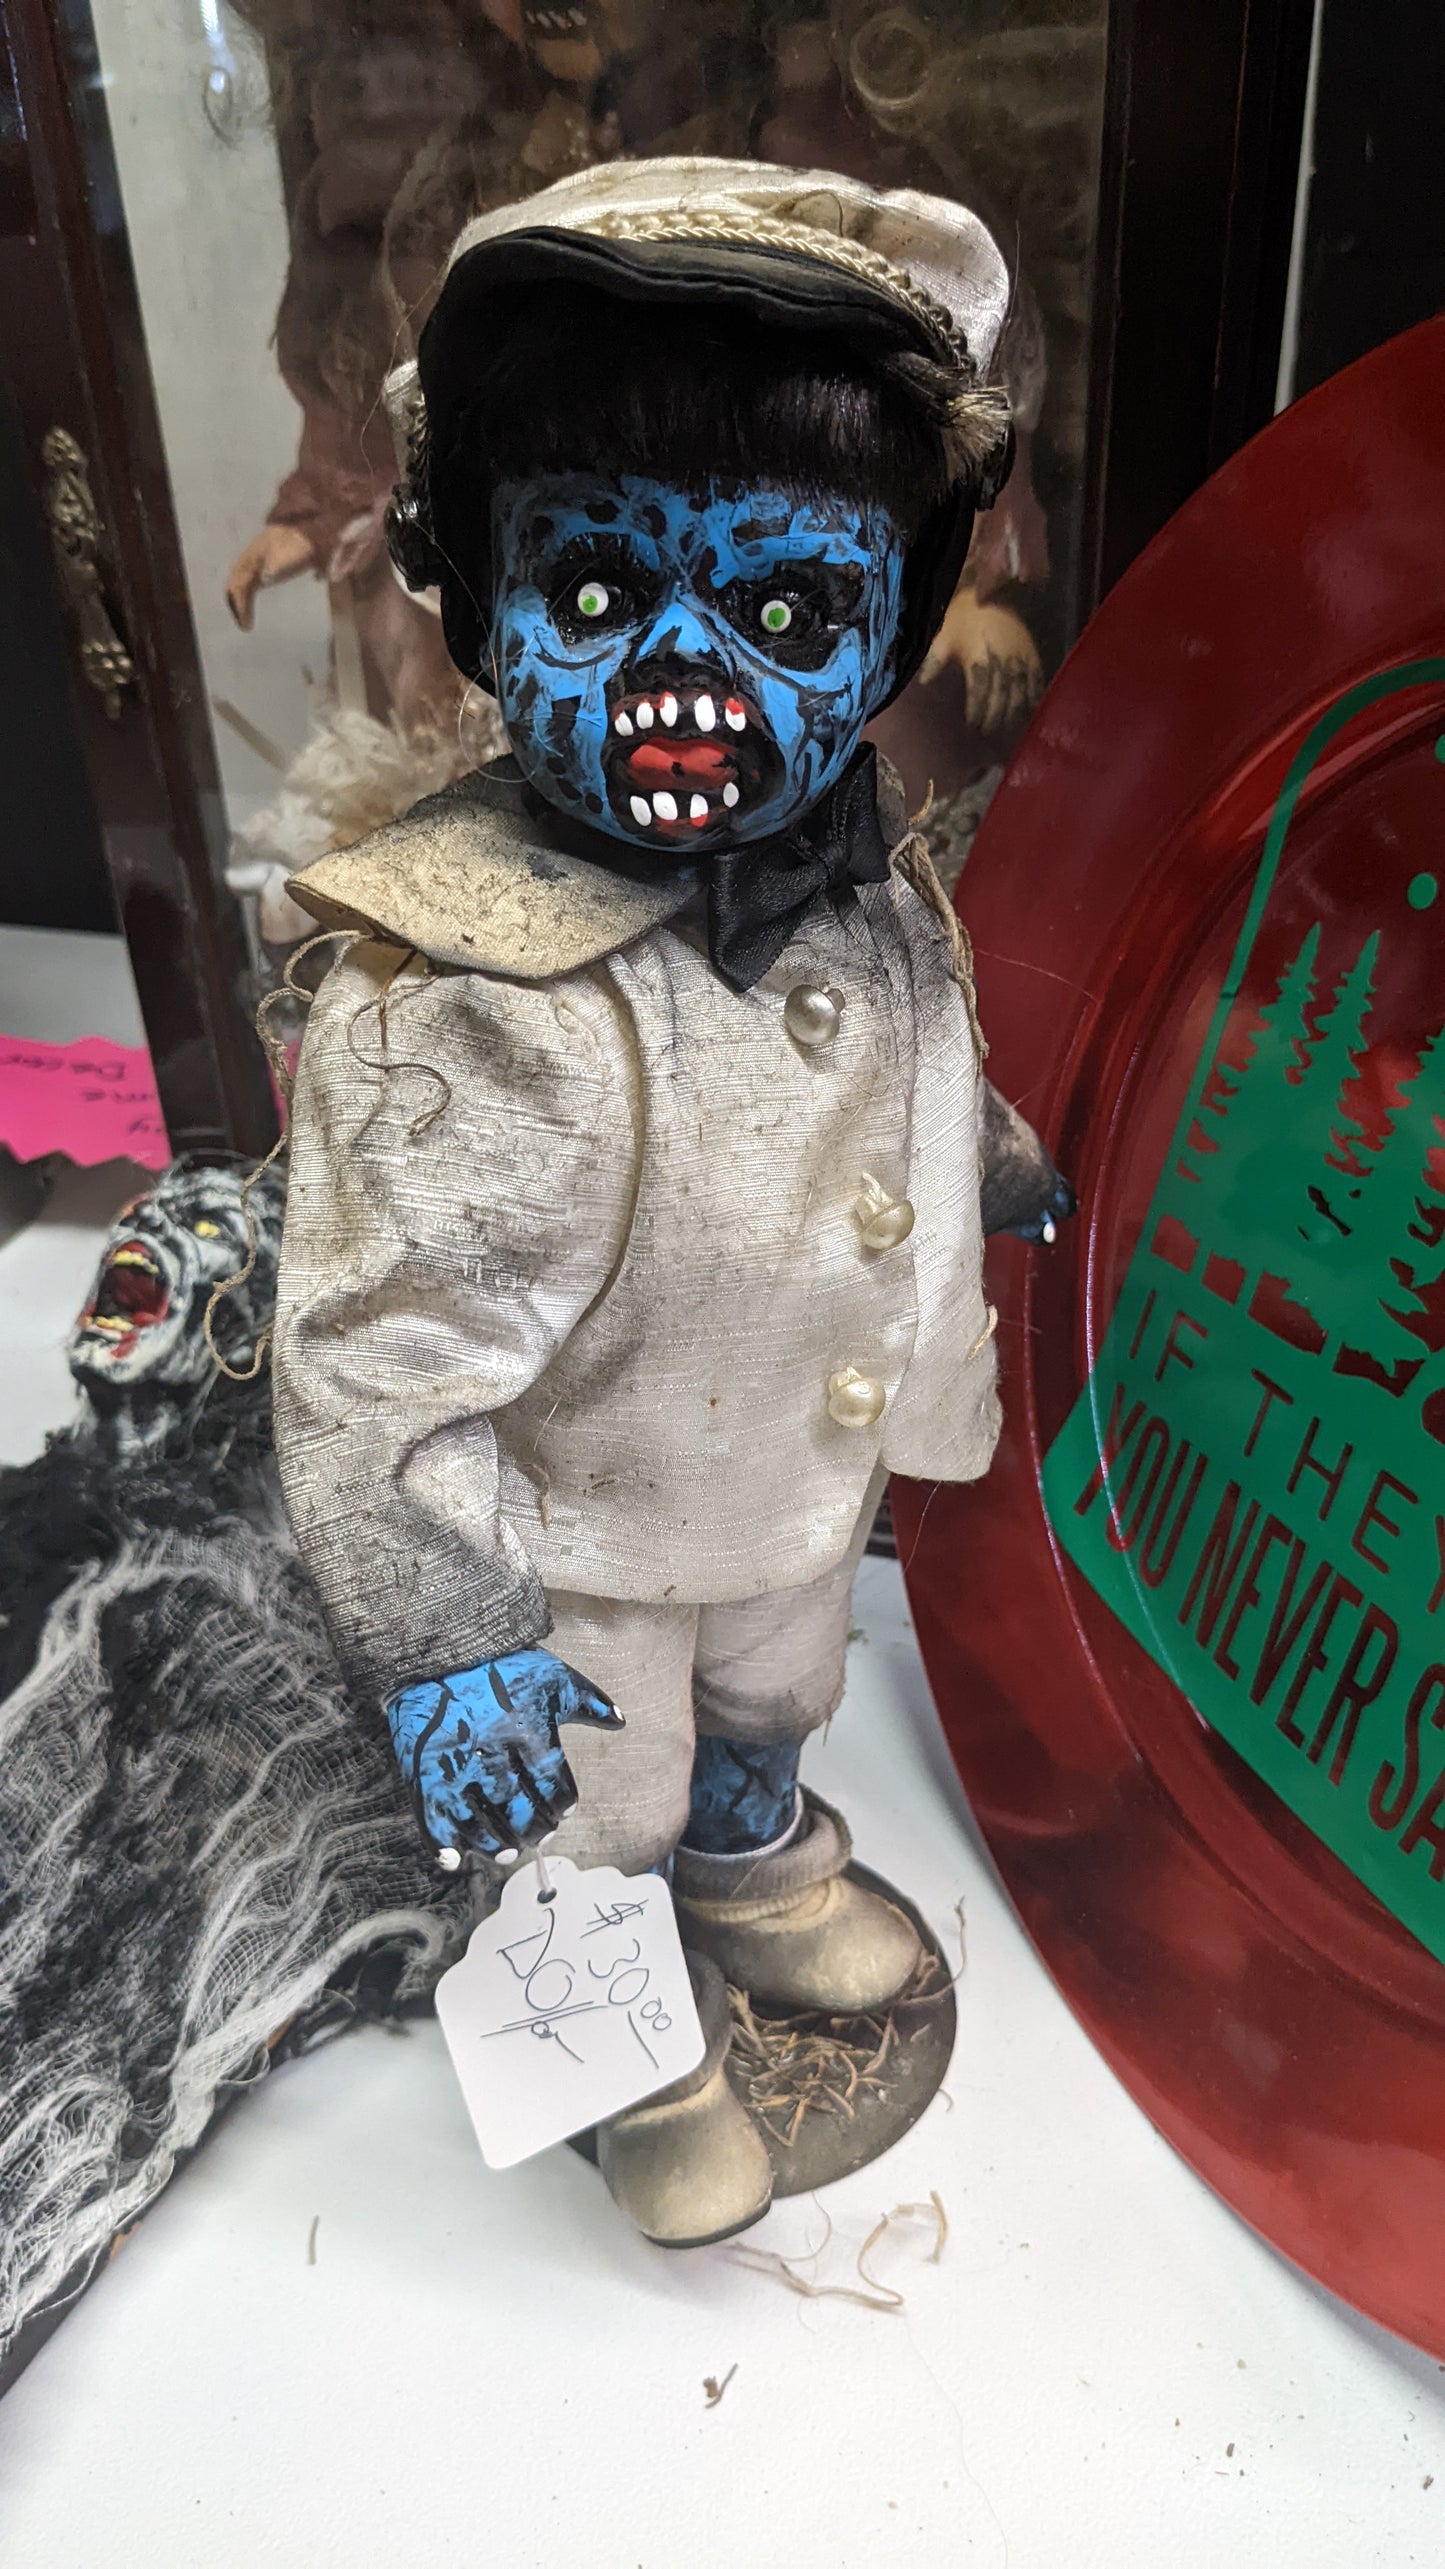 Oller's Oddities "They Live Baby Boy" Spooky Baby Doll